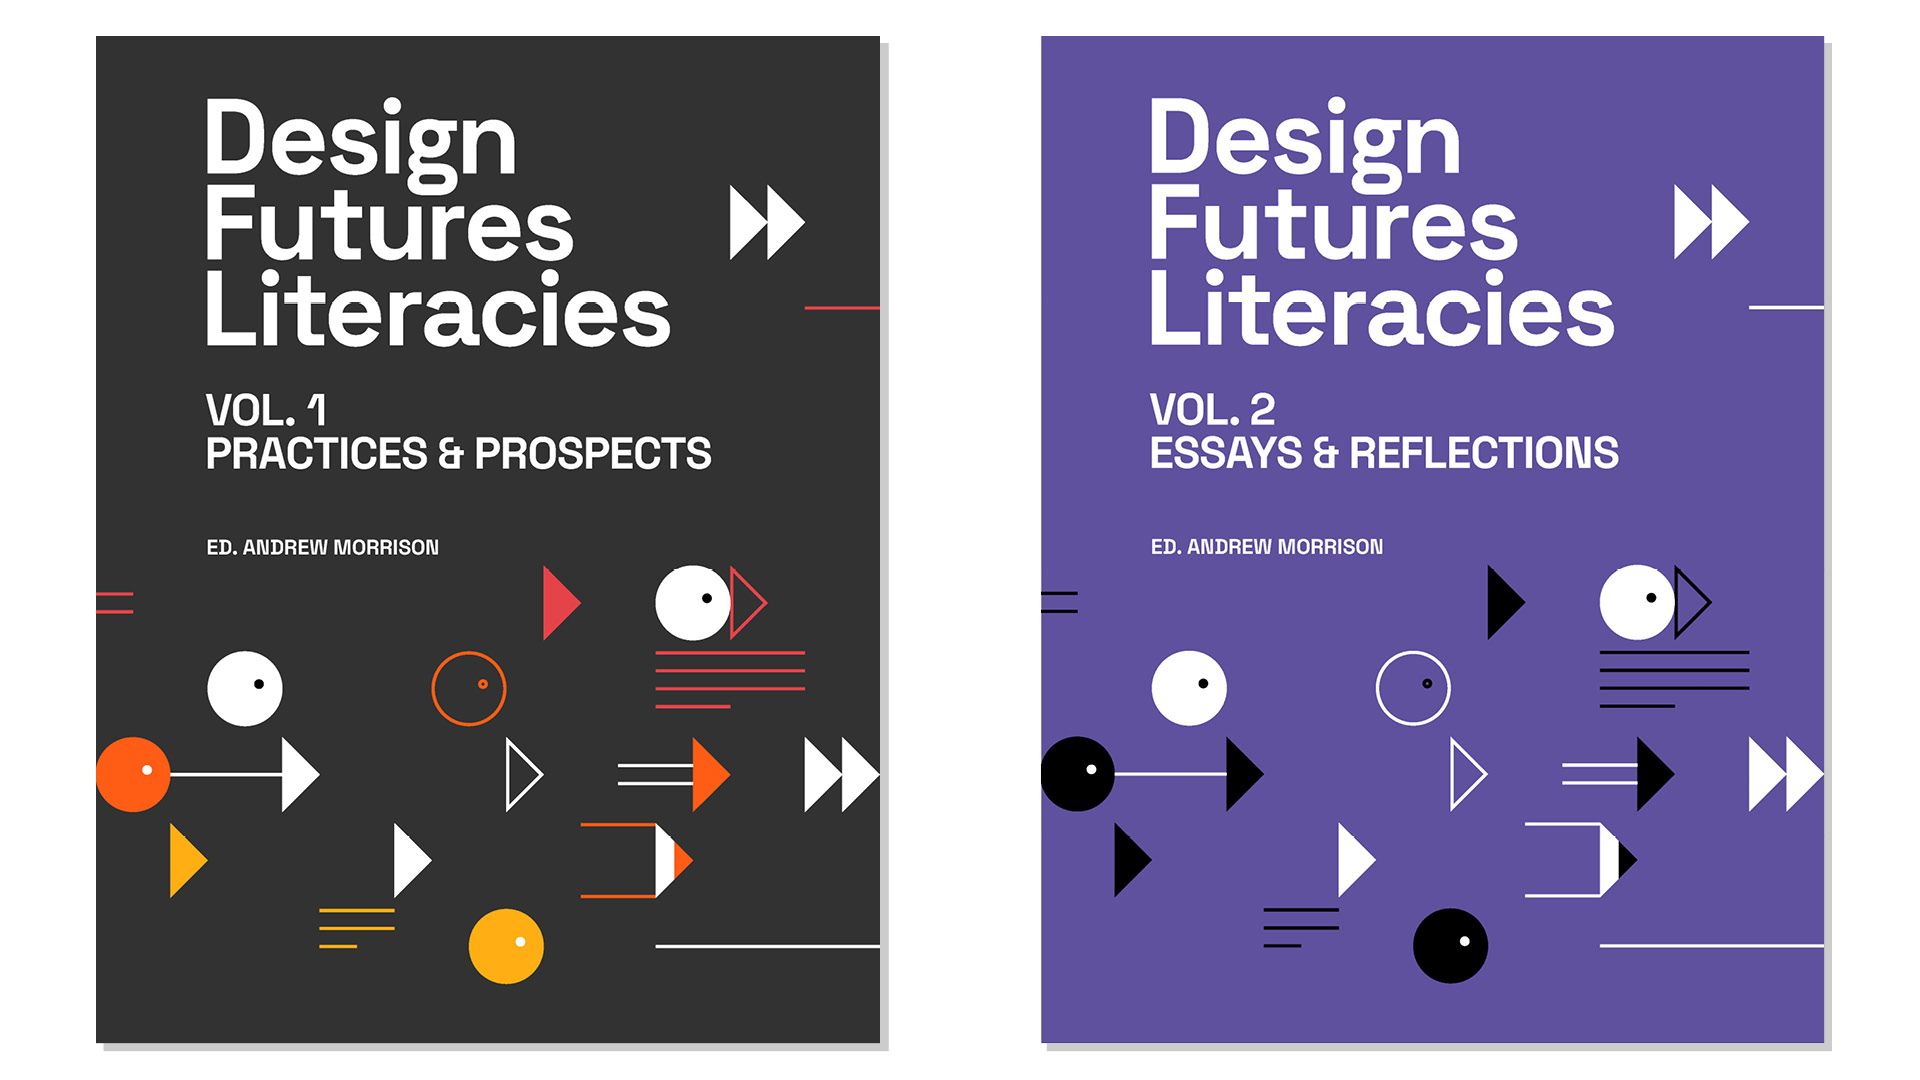 The covers of the 2 ebooks about Design Futures Literacies